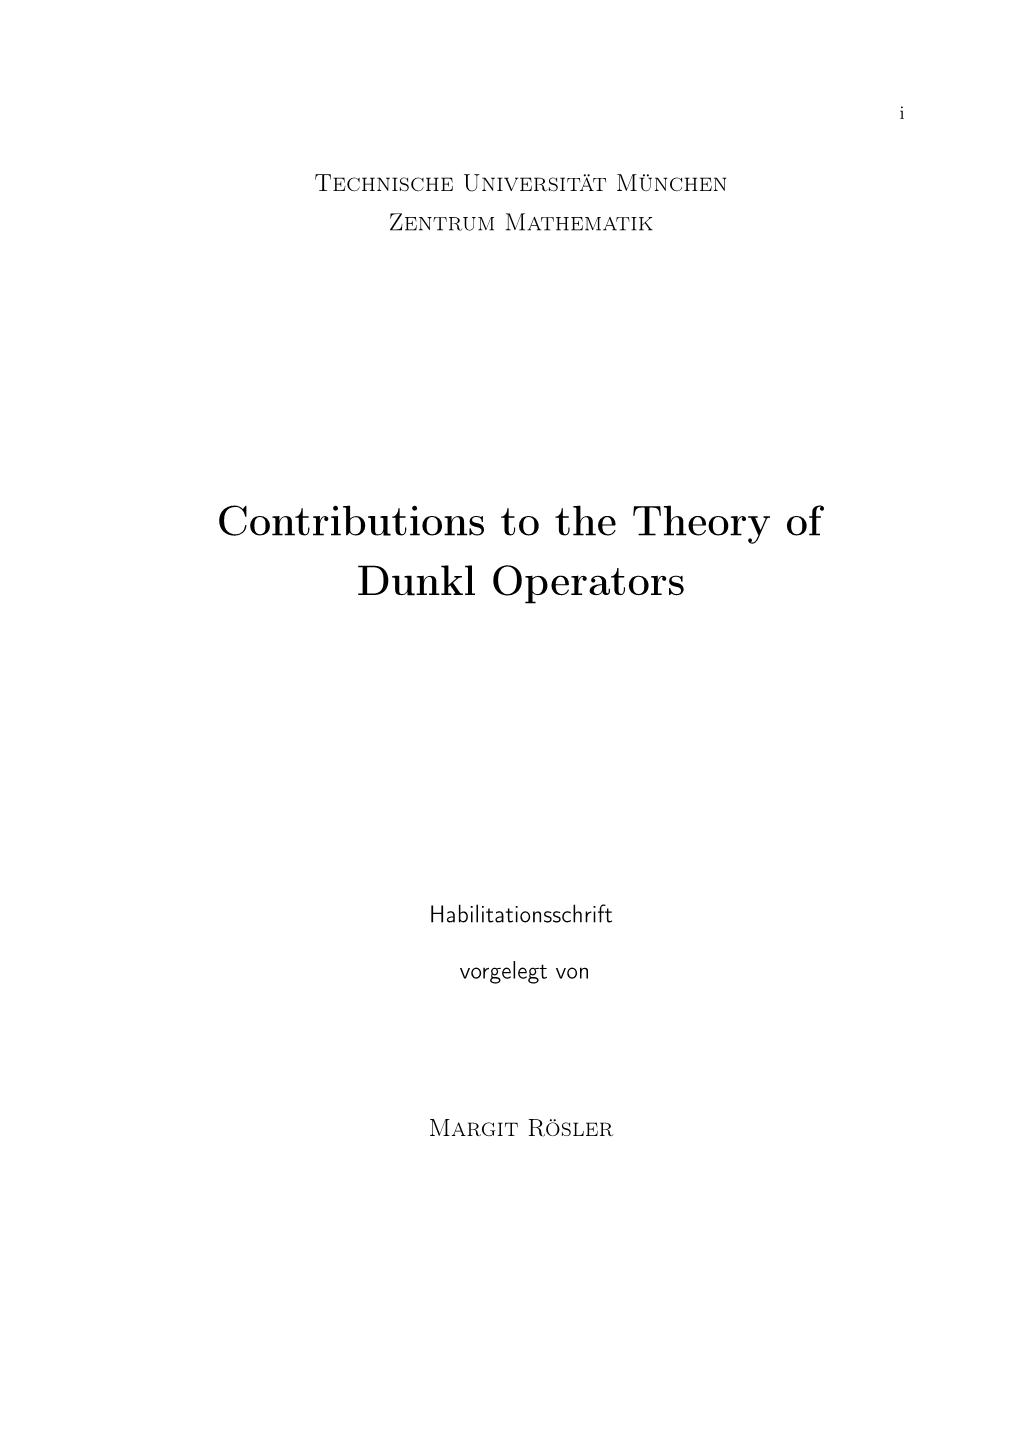 Contributions to the Theory of Dunkl Operators